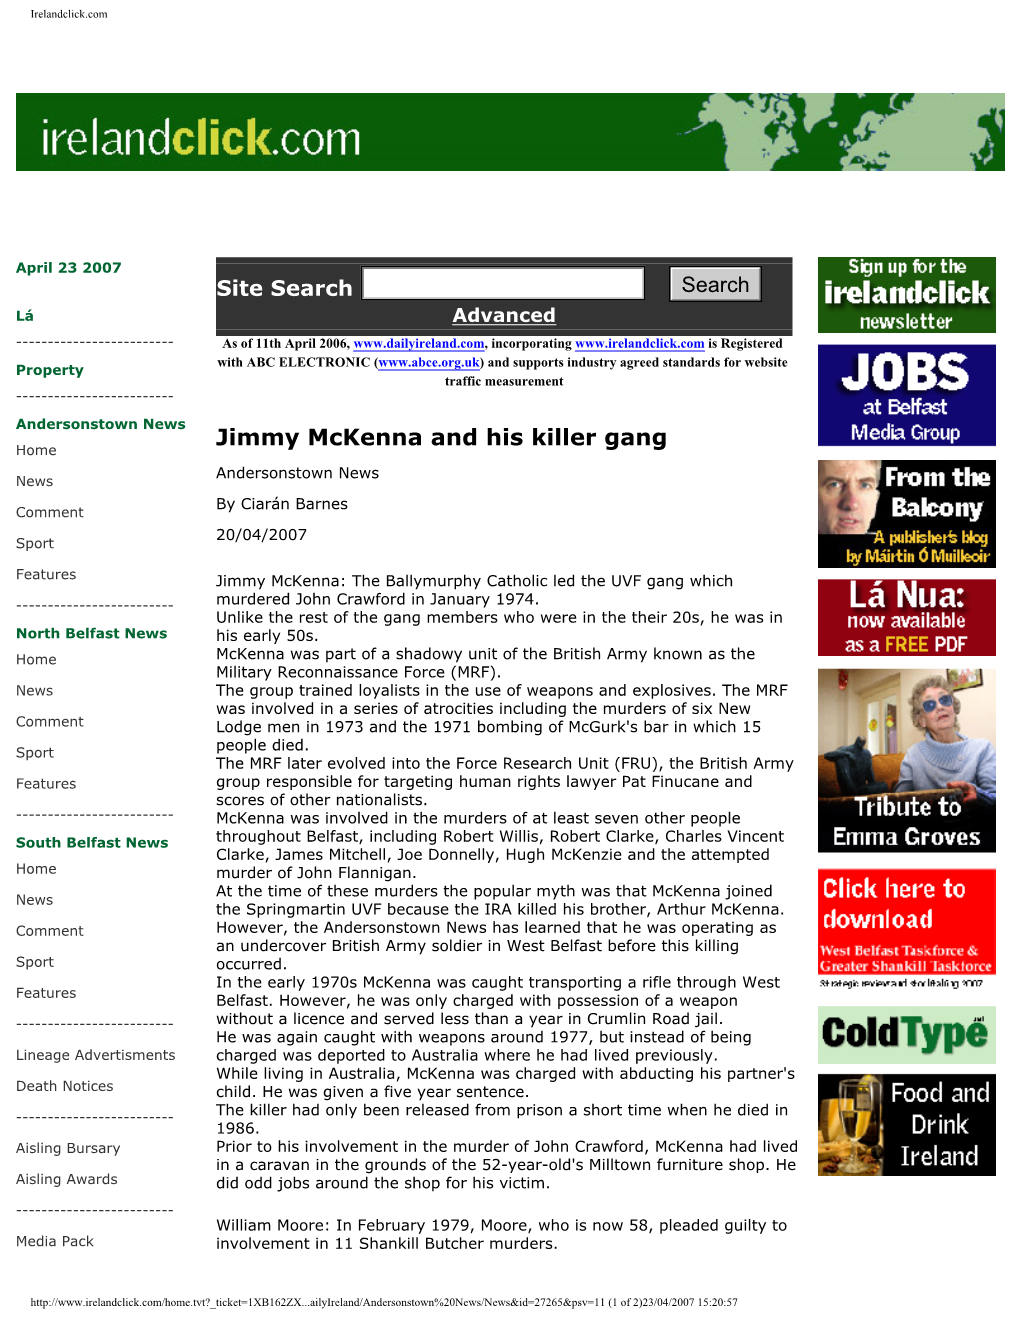 Jimmy Mckenna and His Killer Gang Home Andersonstown News News by Ciarán Barnes Comment 20/04/2007 Sport